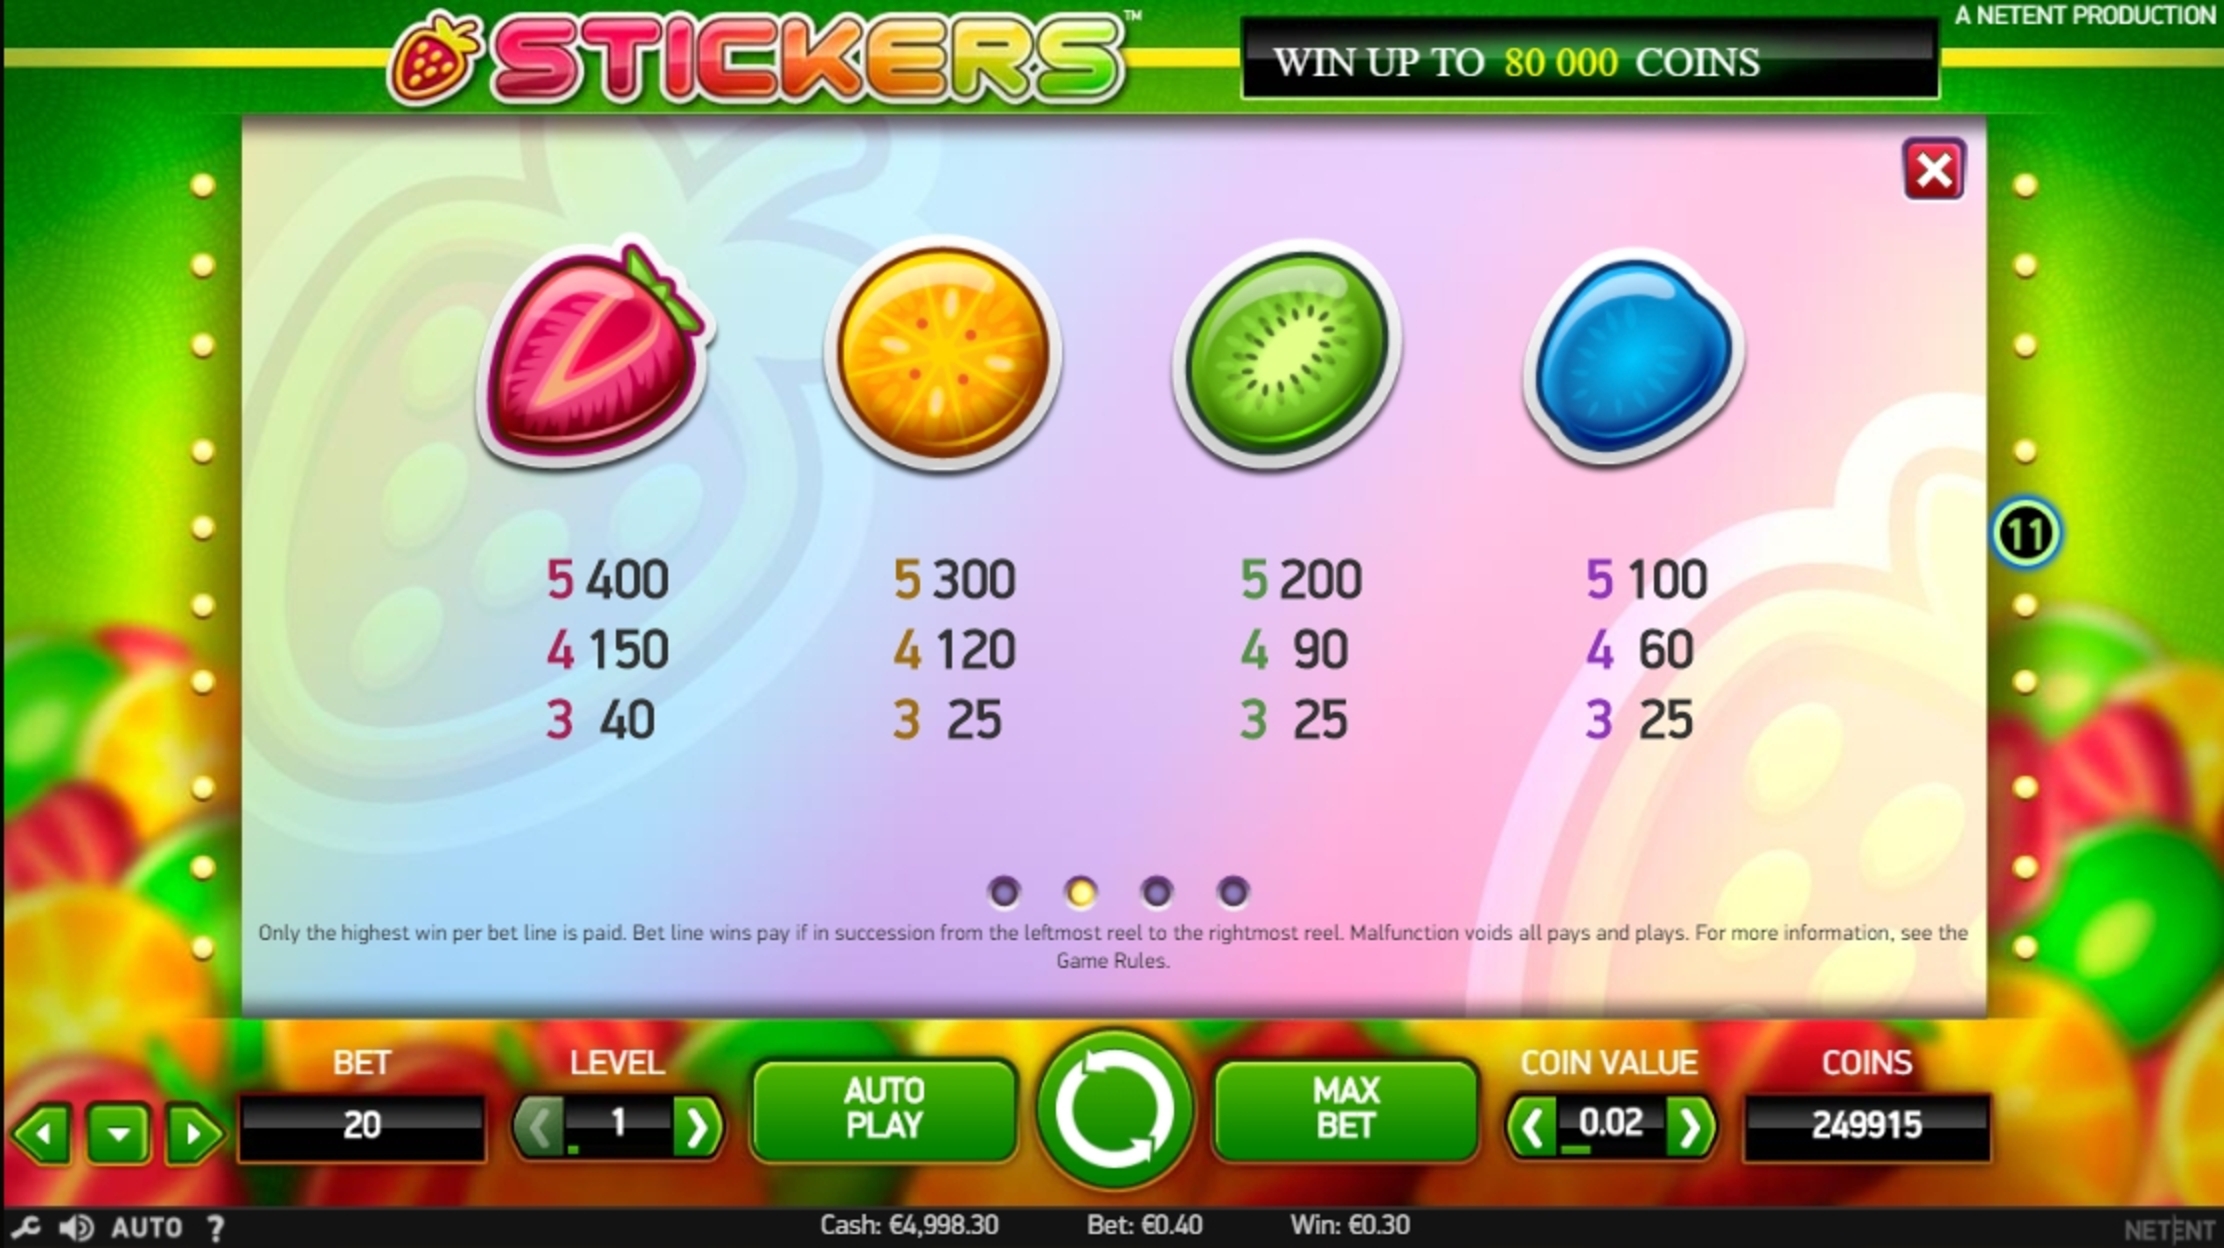 Info of Stickers Slot Game by NetEnt